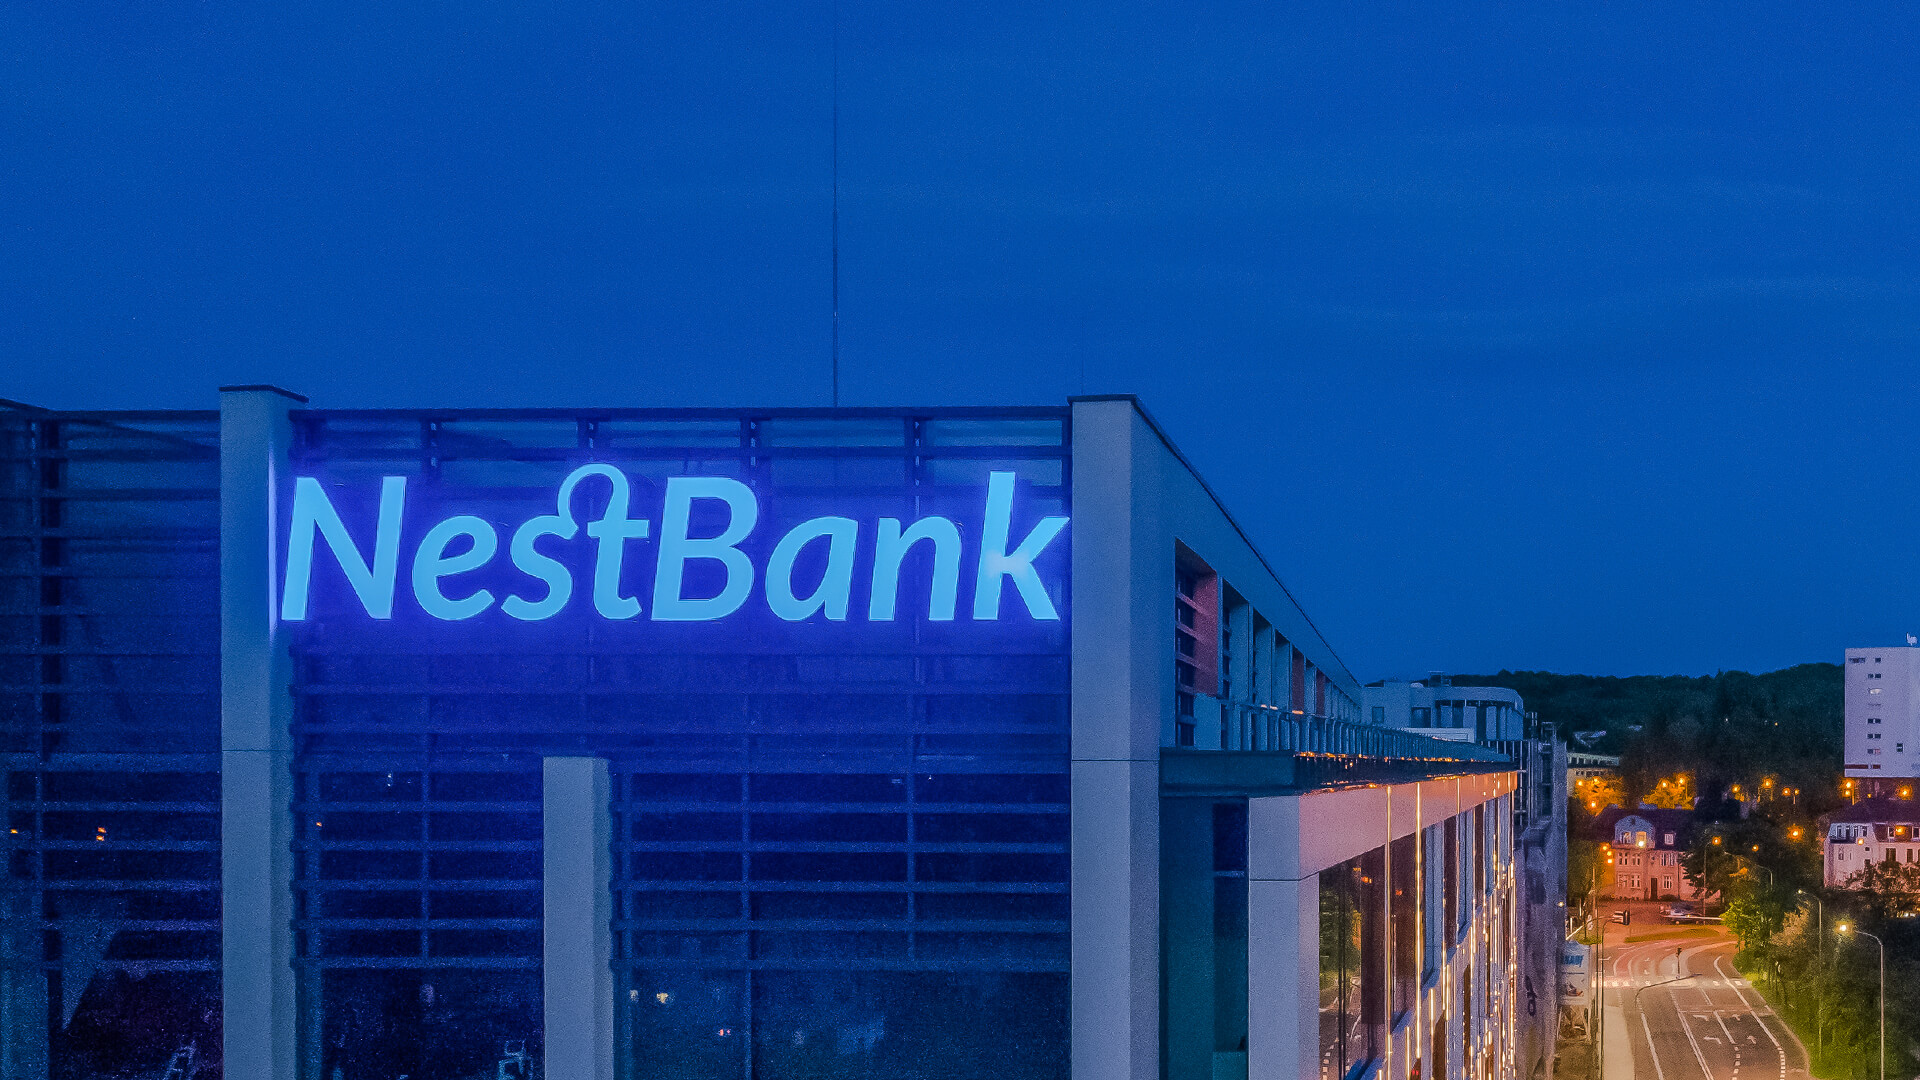 nestbank  - lettere in blocco-led-letters-bank-3d-chanel-letters-advertising-nest-bank-letters-3d-on-the-building-letters-nest-bank